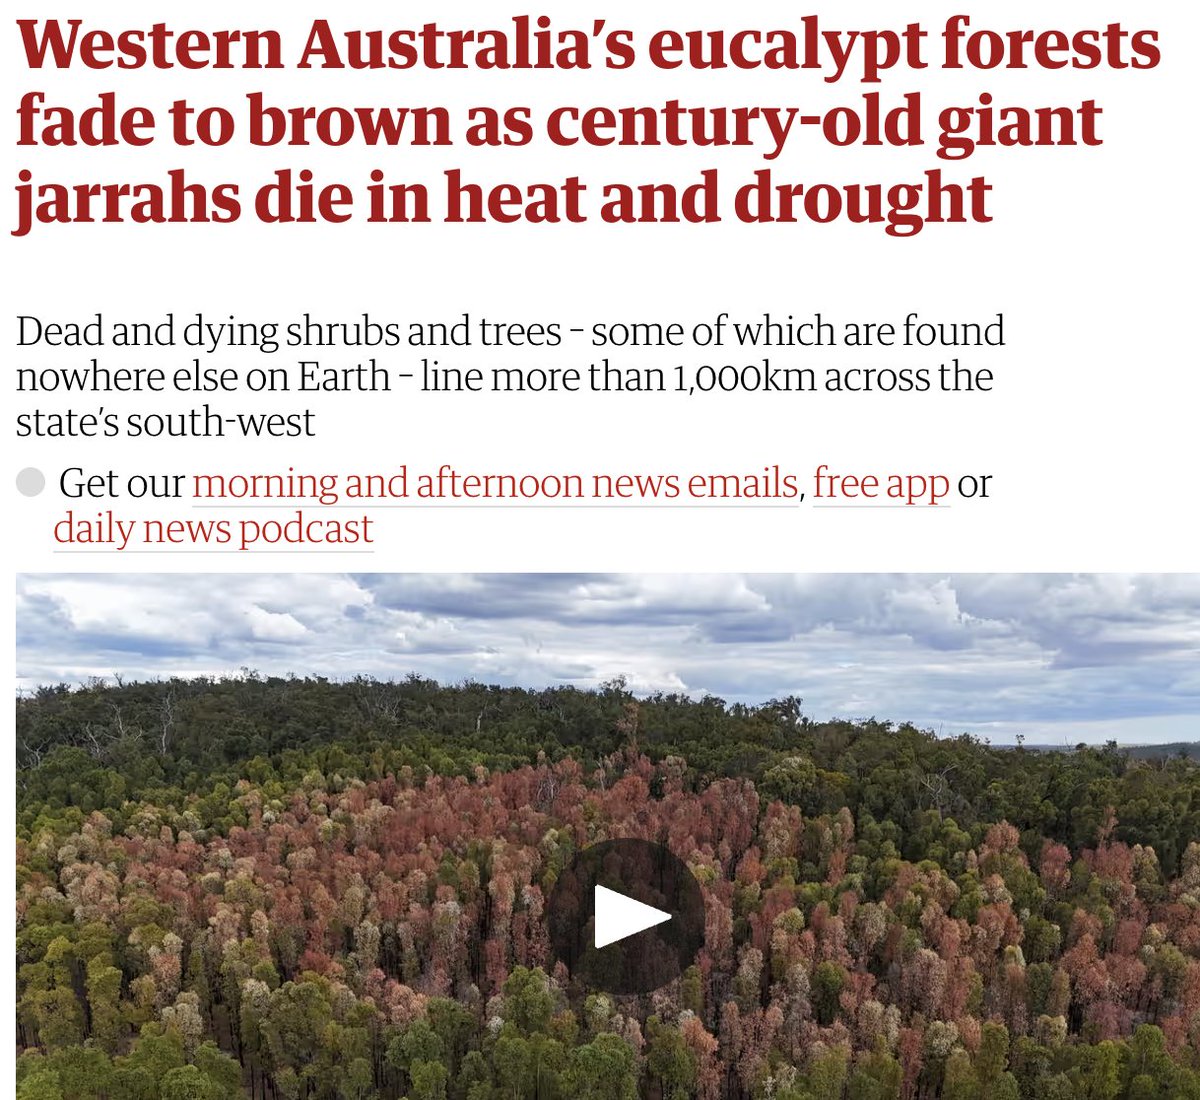 Trees more than a century old are barely alive. Some of these giant jarrahs might survive, but some won’t

It’s a scene being replicated in forests & coastal shrublands spanning more than 1,000km across WA's south-west after drought & baking heat #auspol loom.ly/FA-Xq_E